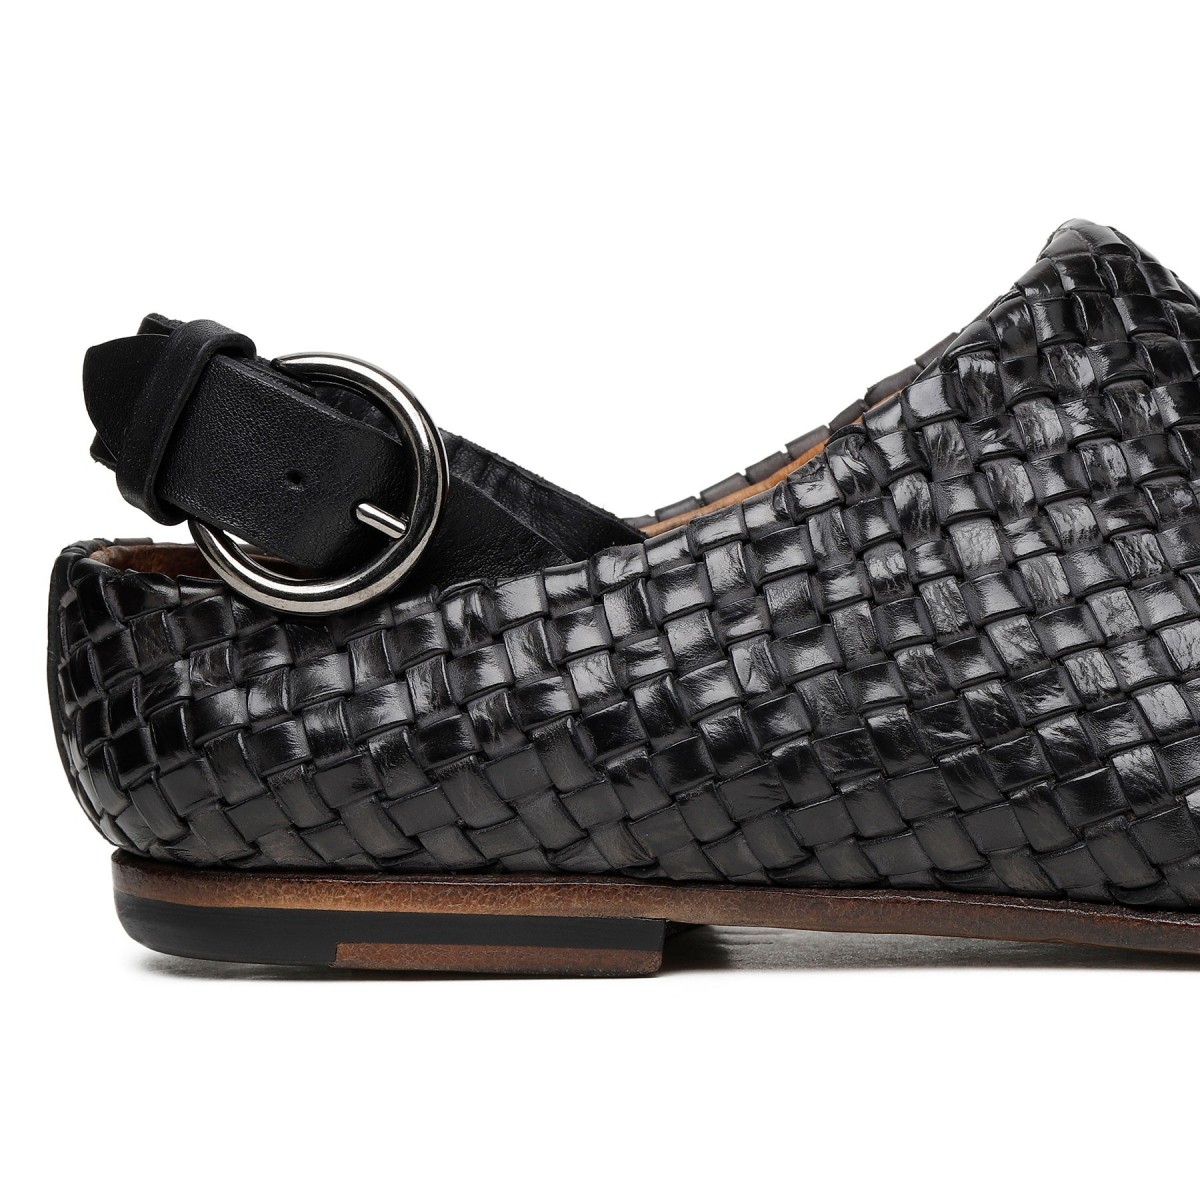 Black woven calf leather slippers